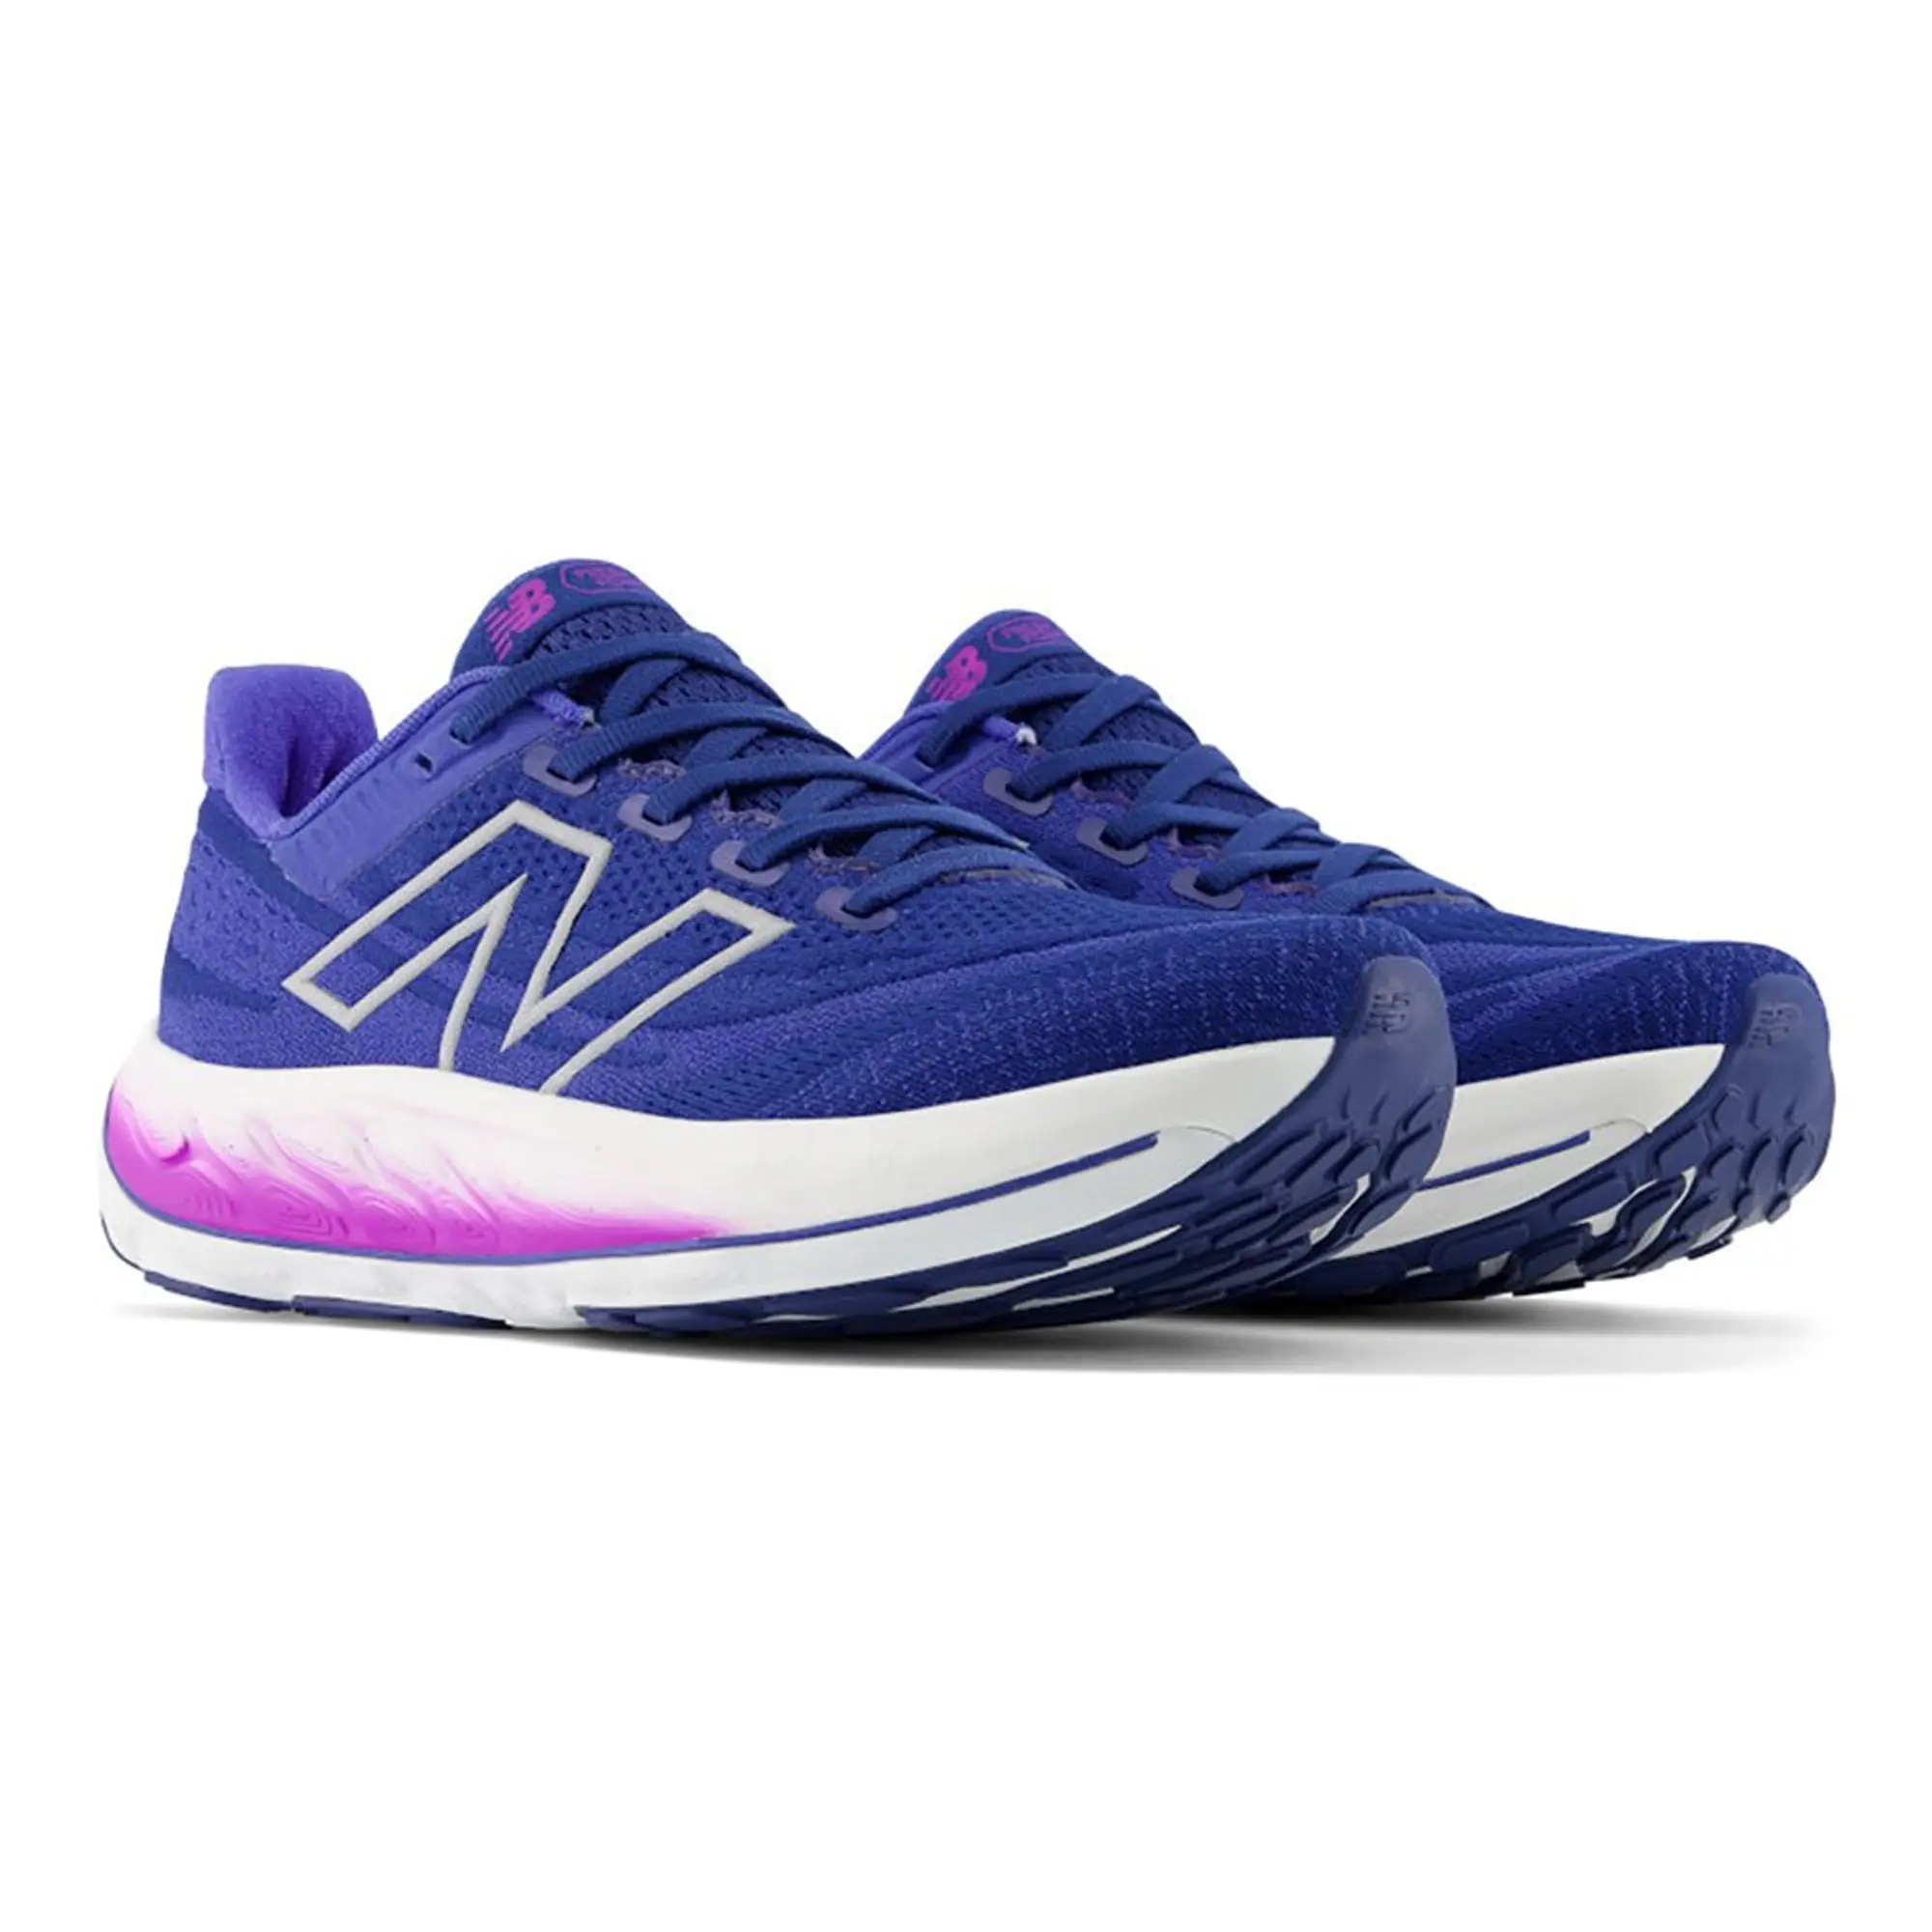 New Balance Women's Fresh Foam X Vongo v6 in Blue/Pink Synthetic